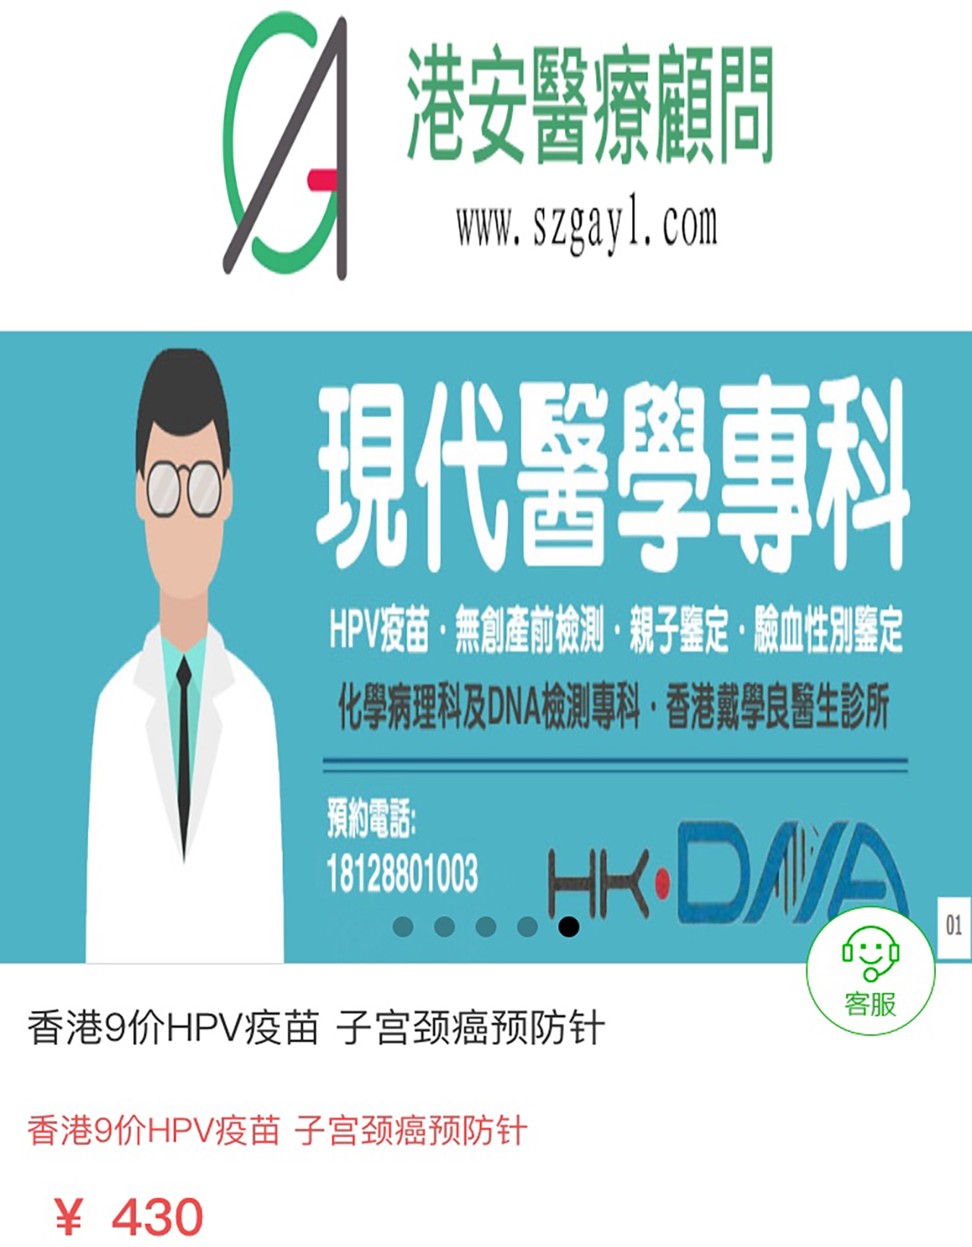 The website of Gangan Medical Consultant (Shenzhen) Limited offers HPV vaccination booking service at Modern Medical Specialties, a subsidiary of Modern Medical Holdings, with booking fees ranging from 400 to 600 yuan. Photo: Handout